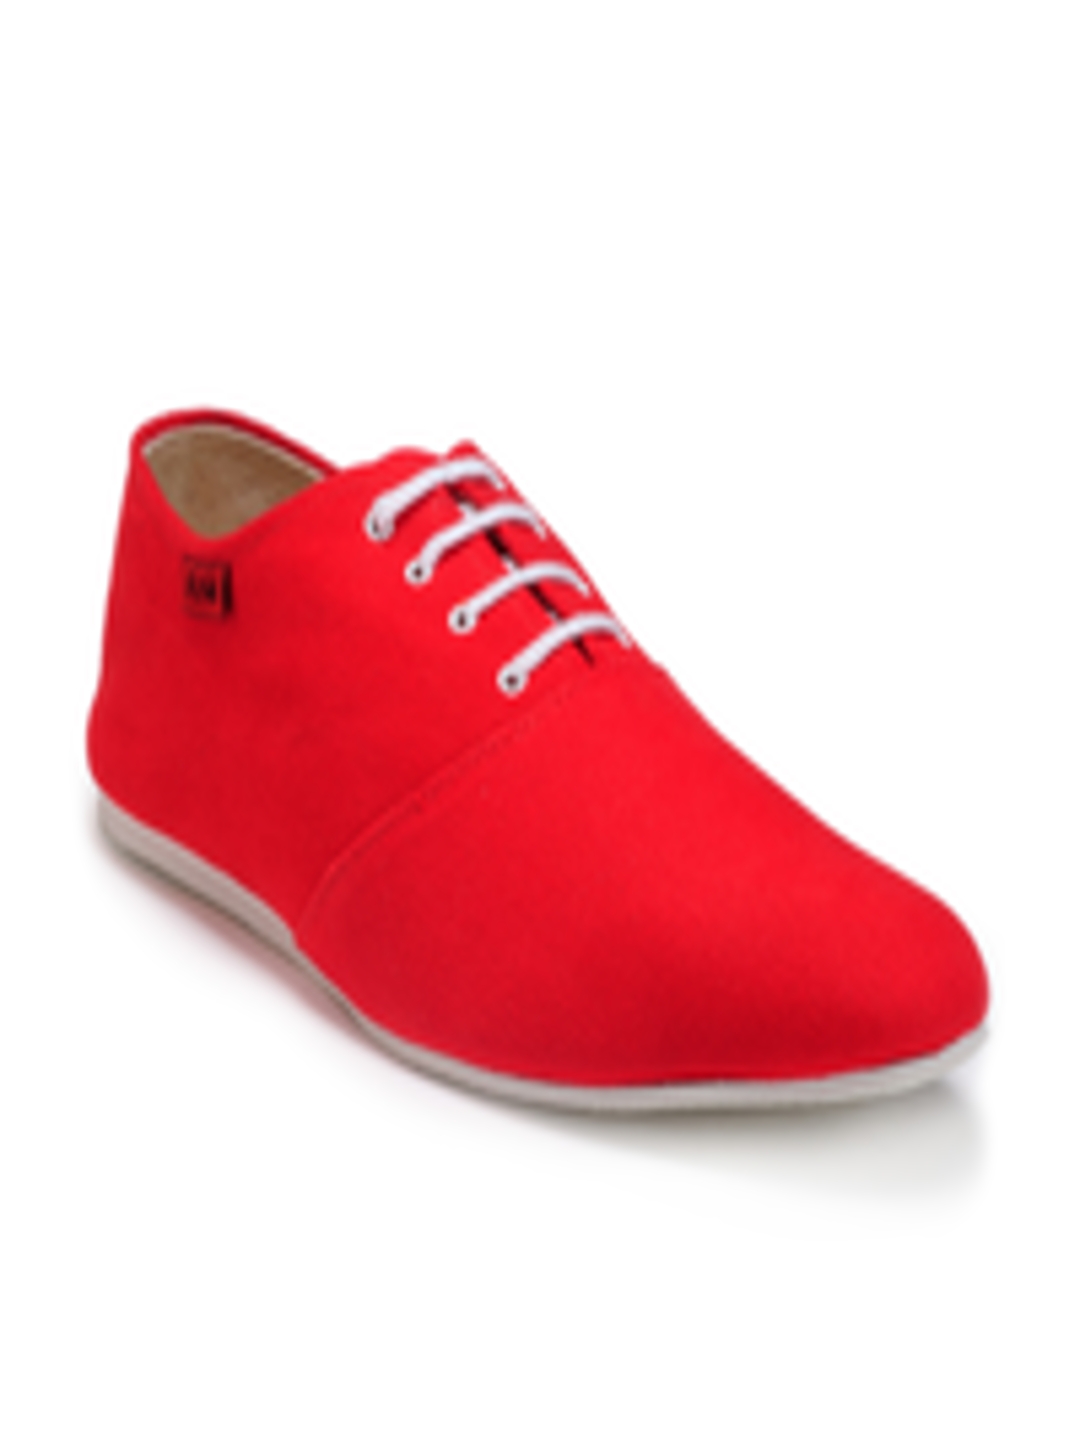 Buy Funk Men Red Casual Shoes - Casual Shoes for Men 278425 | Myntra